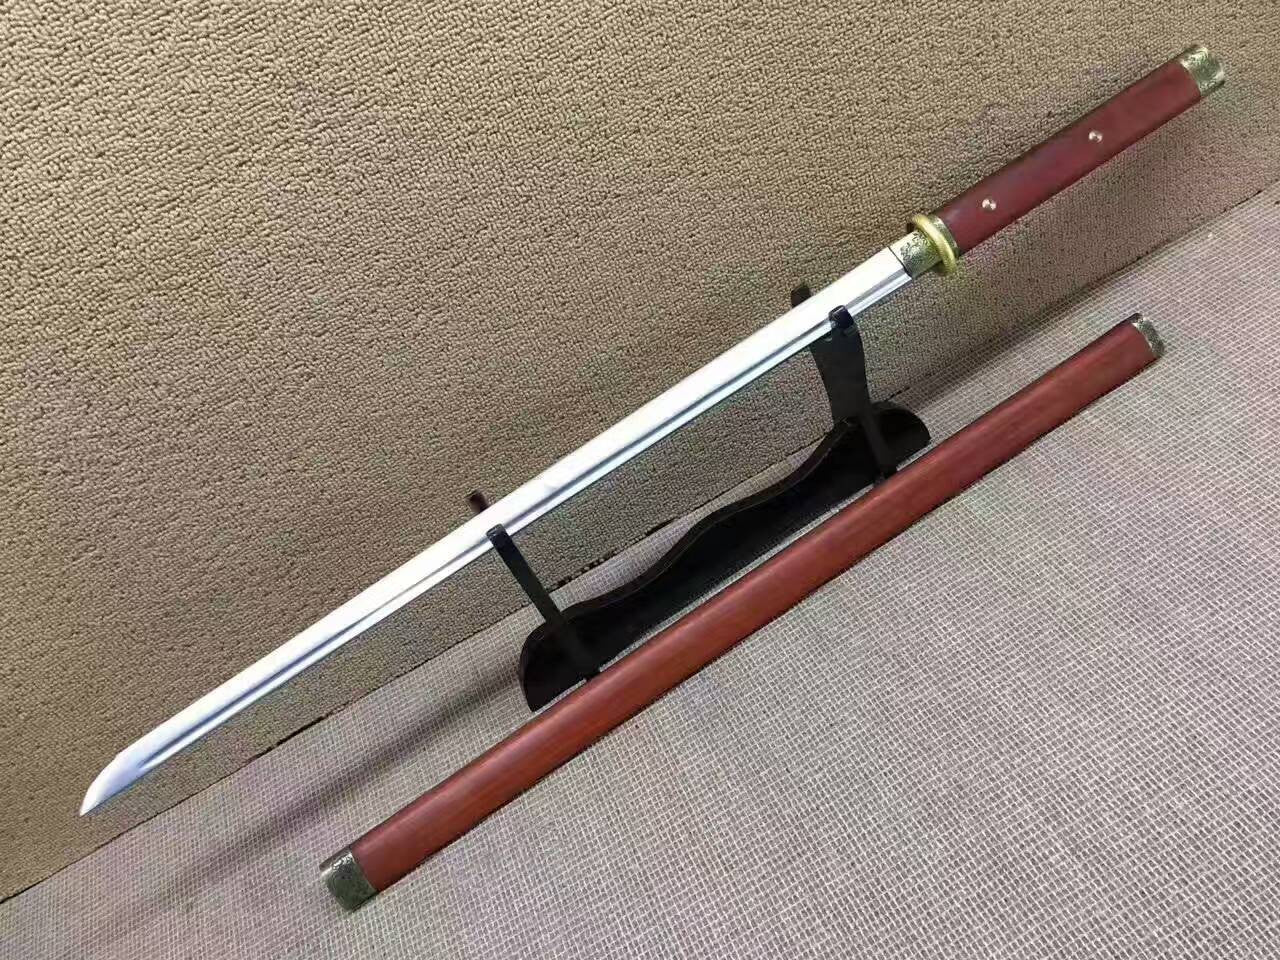 Simple straight sword,Handmade knife,High manganese steel,Redwood scabbard,Full tang,Length 40 inch - Chinese sword shop